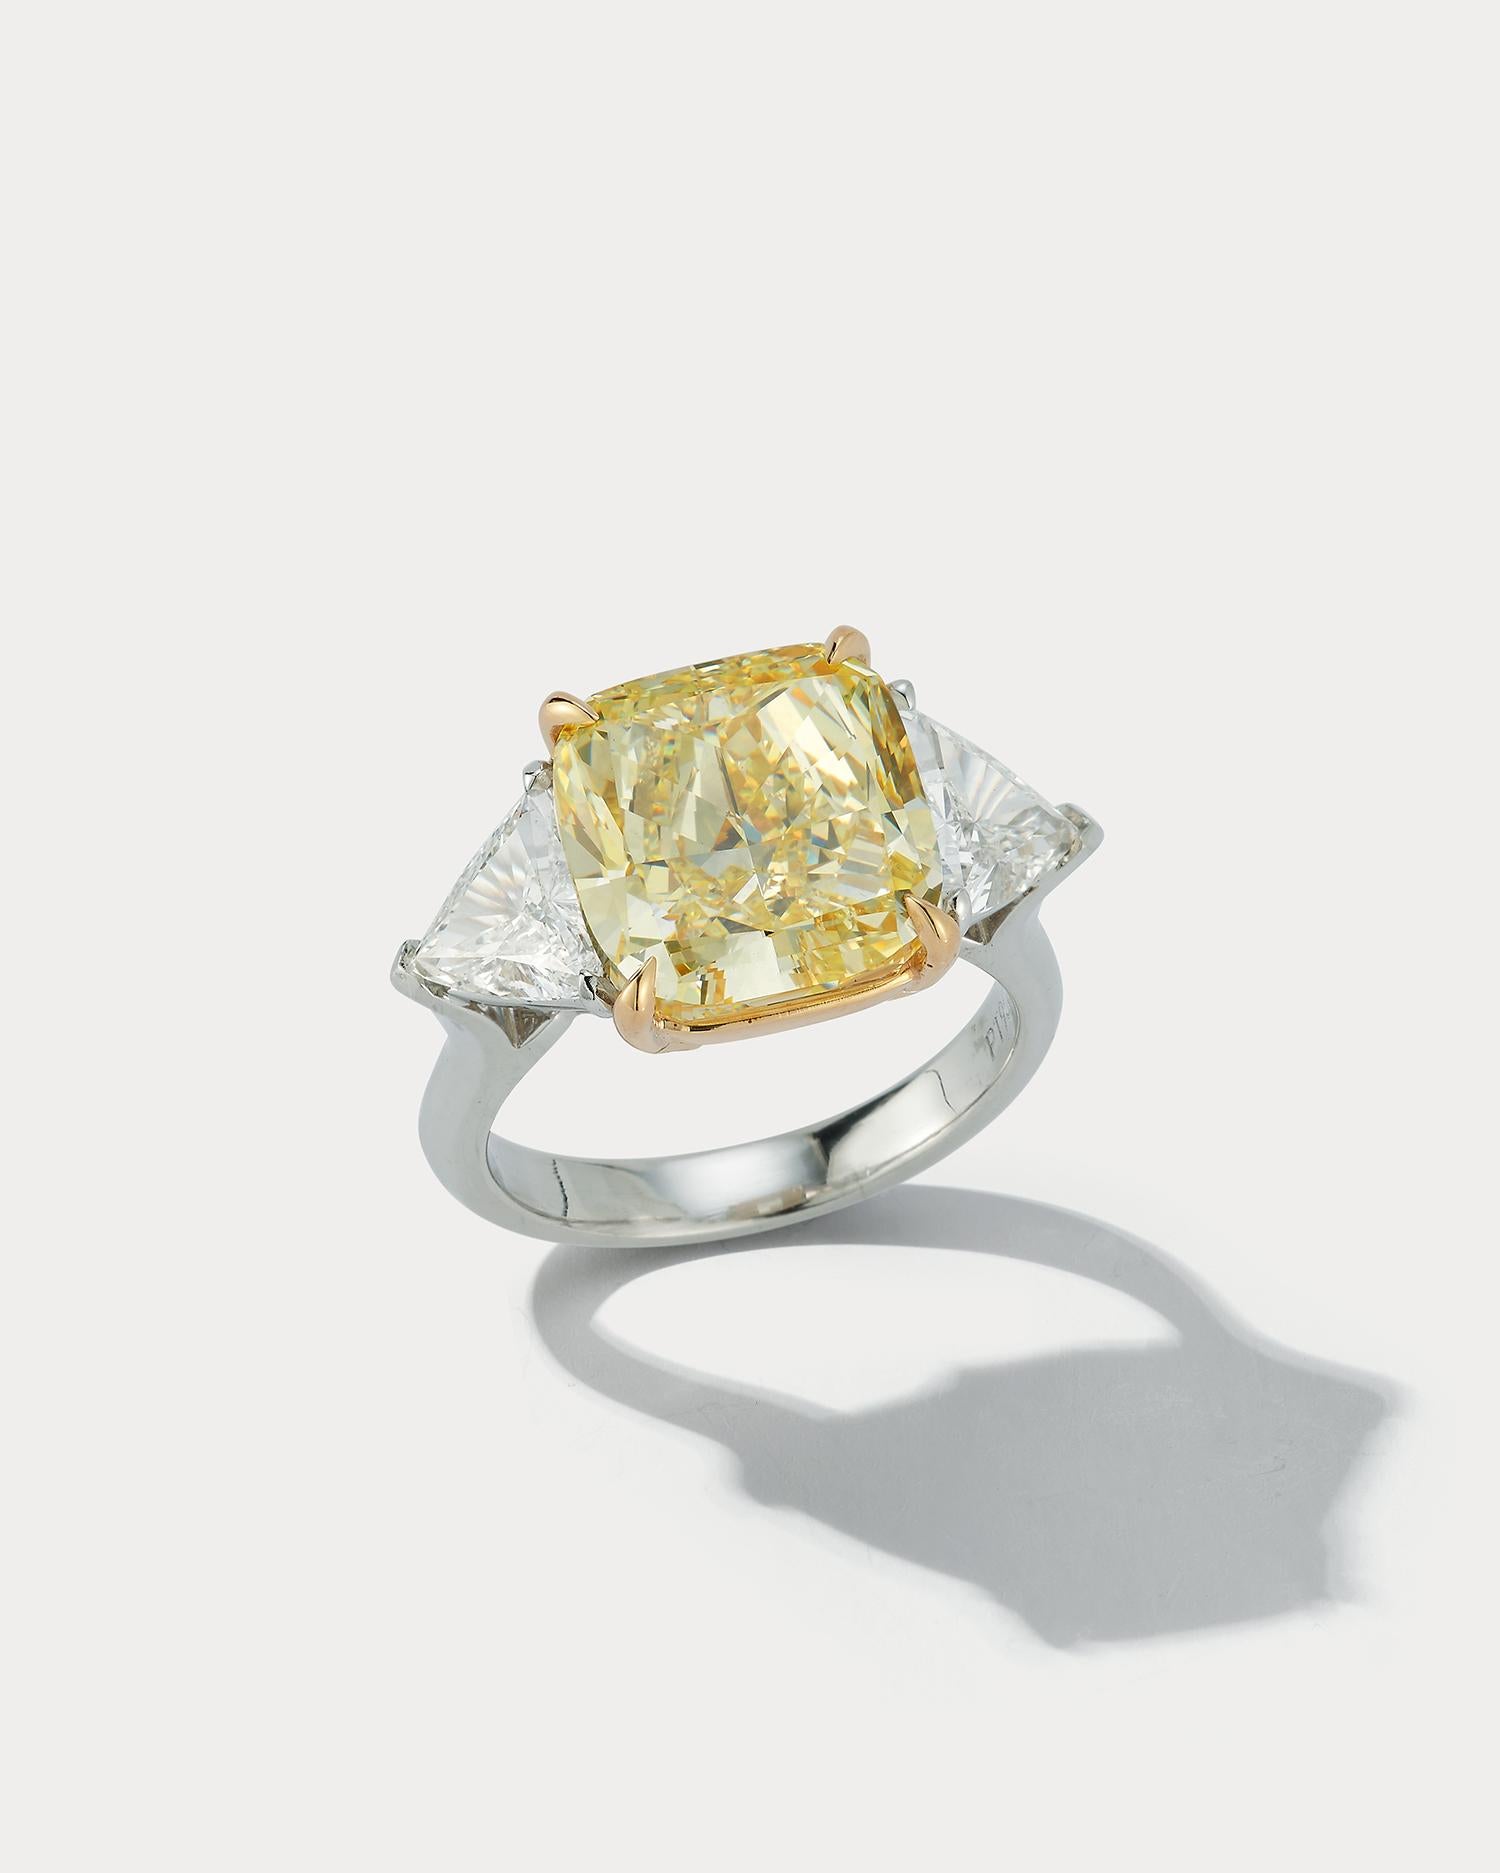 An amazing ring for everyday. In the center an 8.01 carat Fancy Yellow, VS1 Cushion-cut diamond GIA certified. Flanked by two large Trillions weighing 1.45 carats total. The center stone is set in 18K Yellow Gold. The Trillions and shank are made of